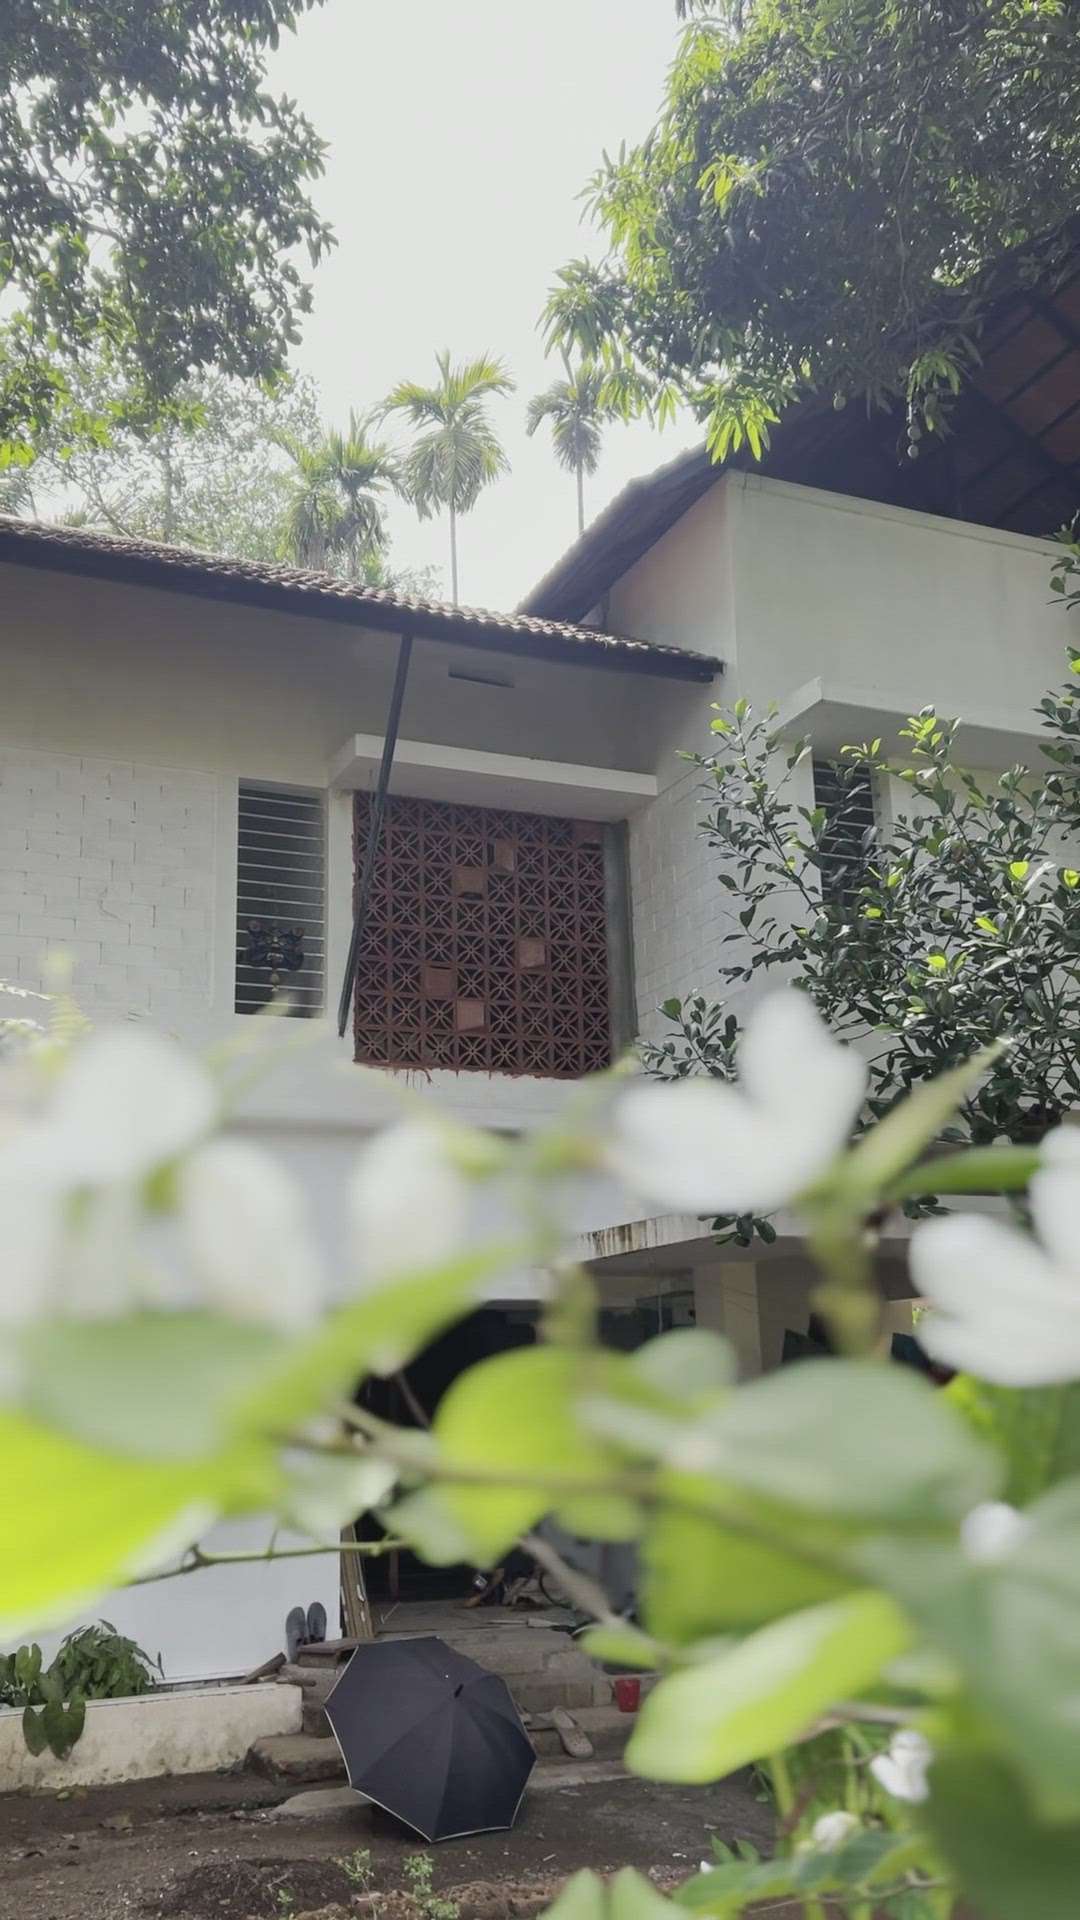 'Swasthi' the breathing house - renovation project taking shape in Manjeri embracing the paddy land and built with 100% reused materials including used wood, stone, tiles and mud jalis.

#KeralaStyleHouse #naturefriendlydesign #budget_home_simple_interi